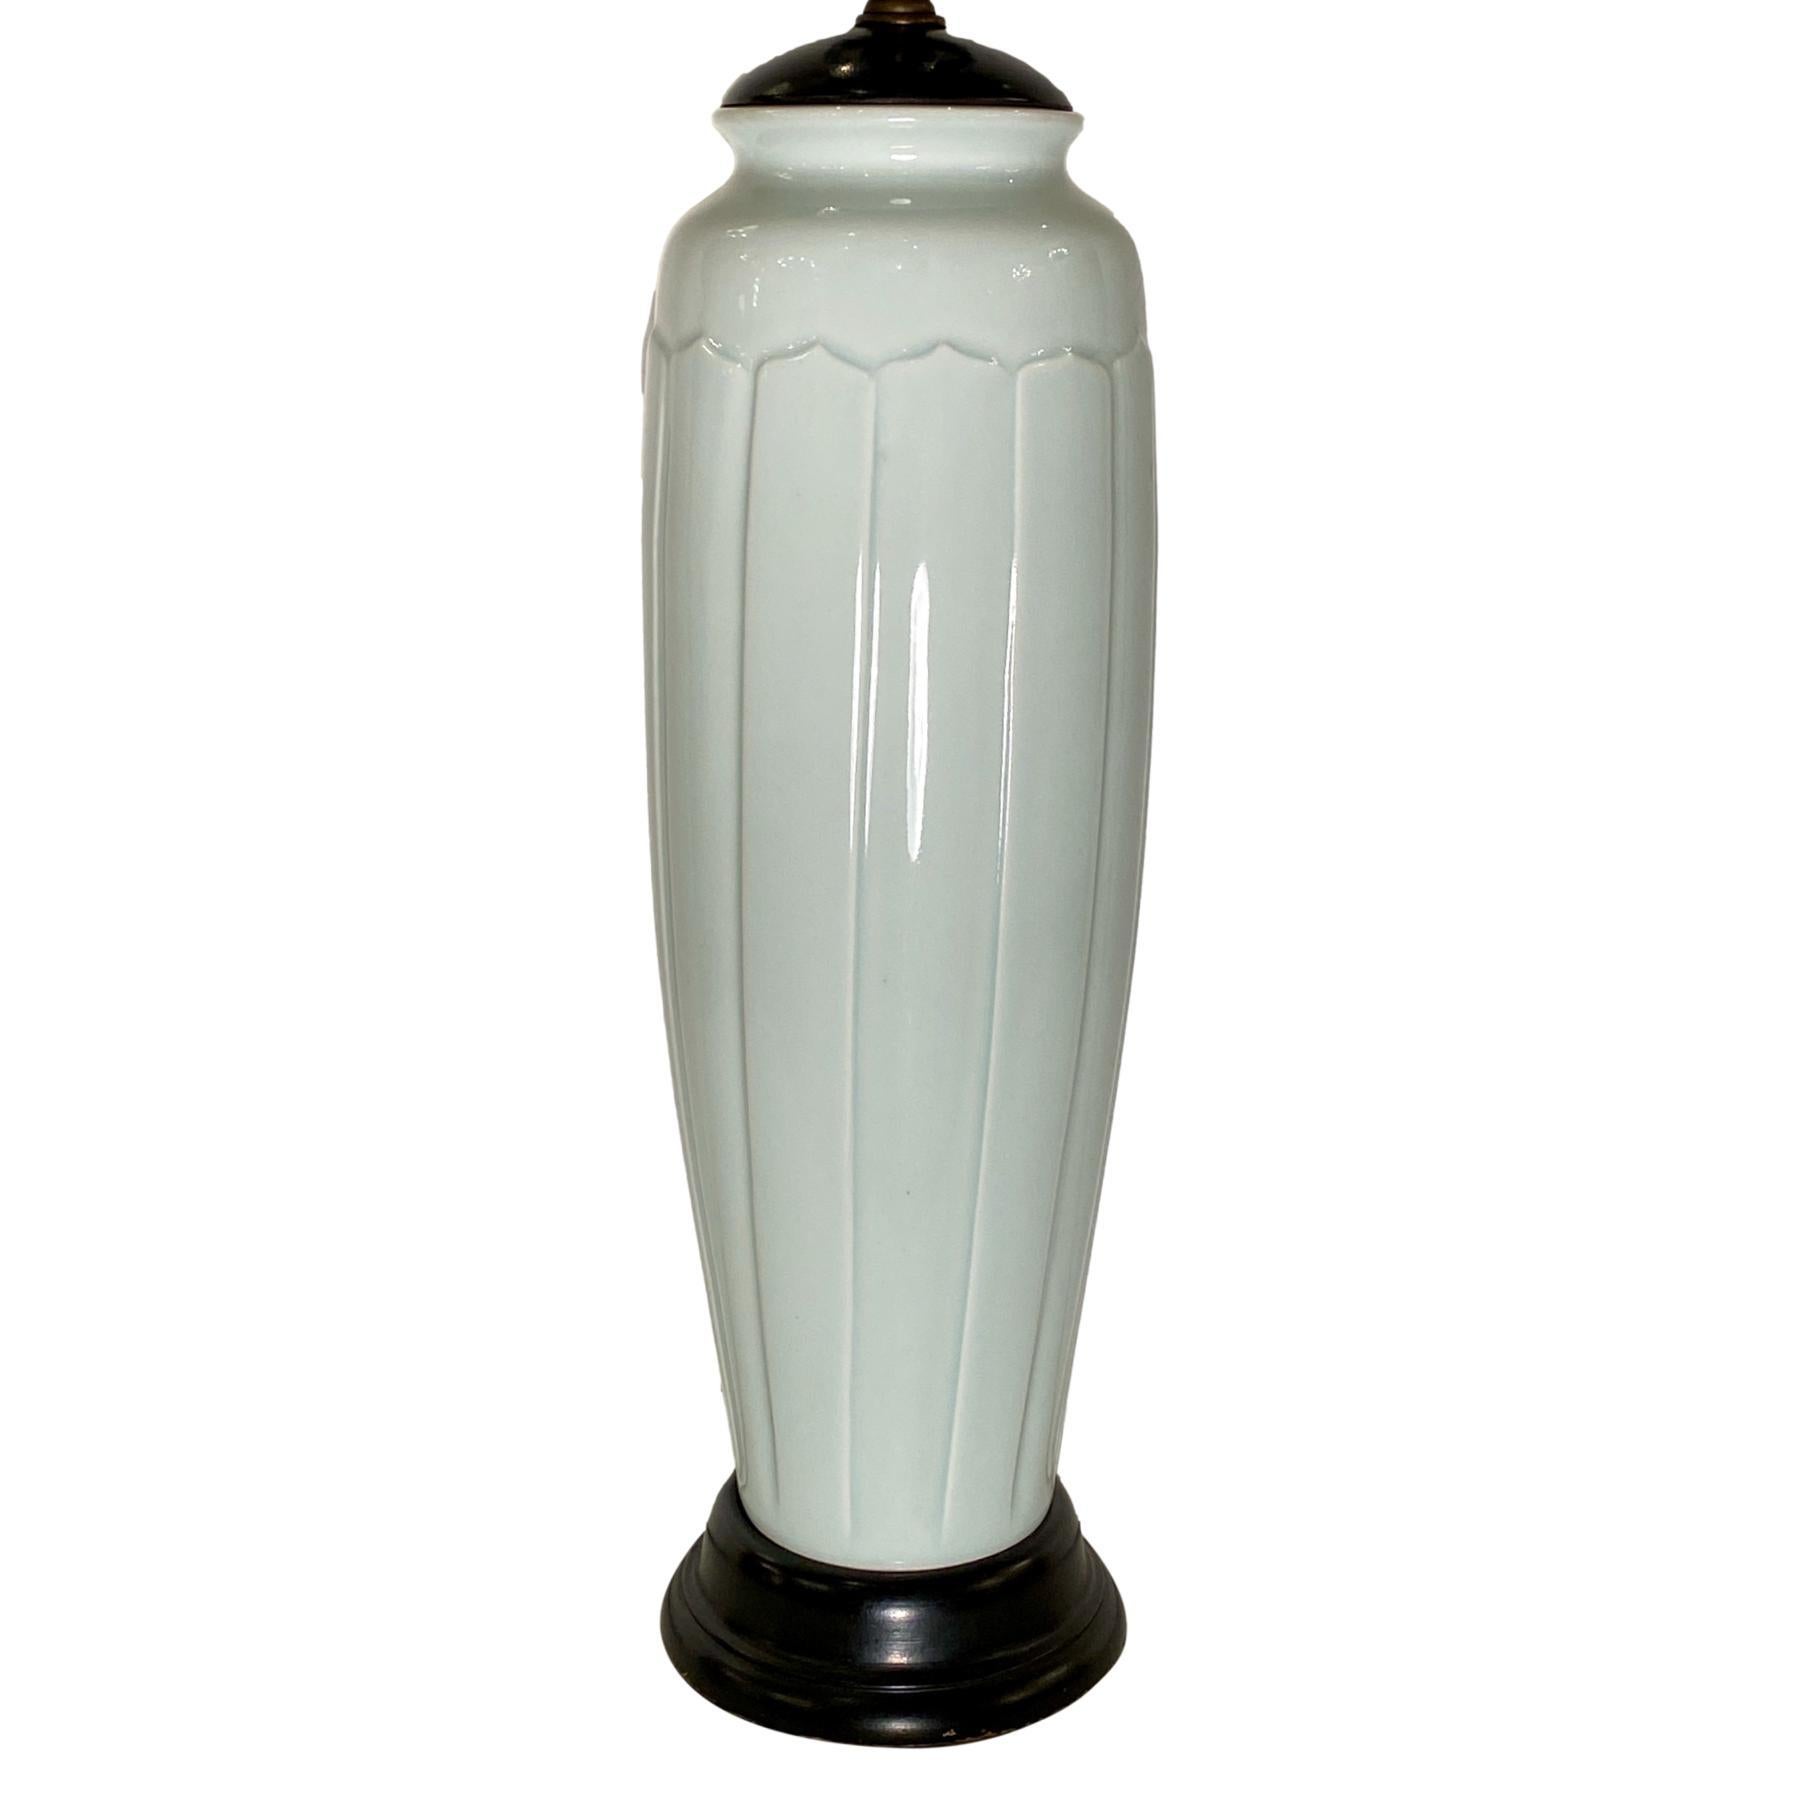 A circa 1940's French porcelain table lamp with wooden base.

Measurements:
Height of body: 16.5